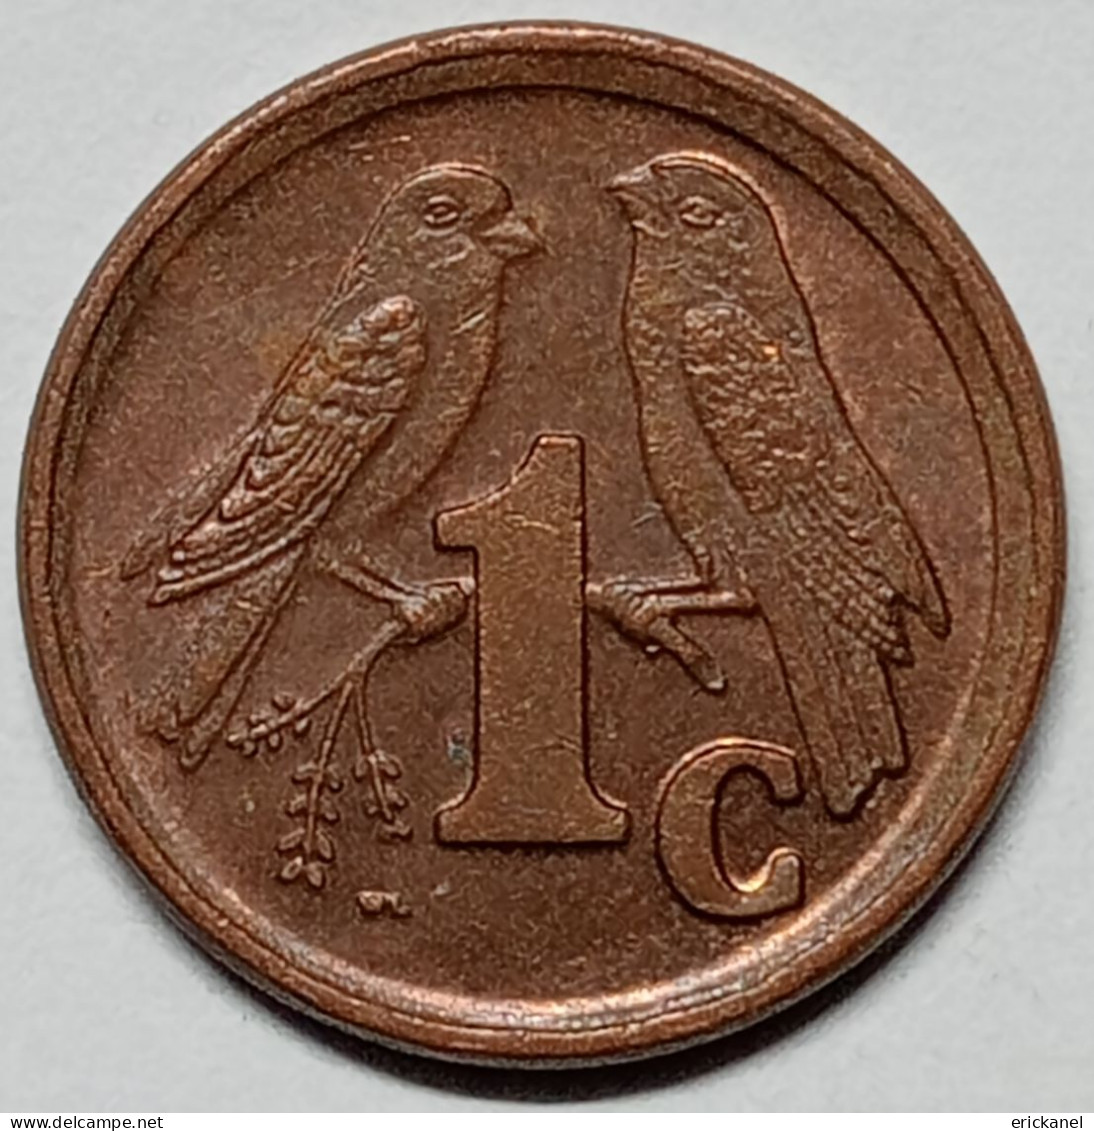 SOUTH AFRICA 1990 1 CENT - Sud Africa